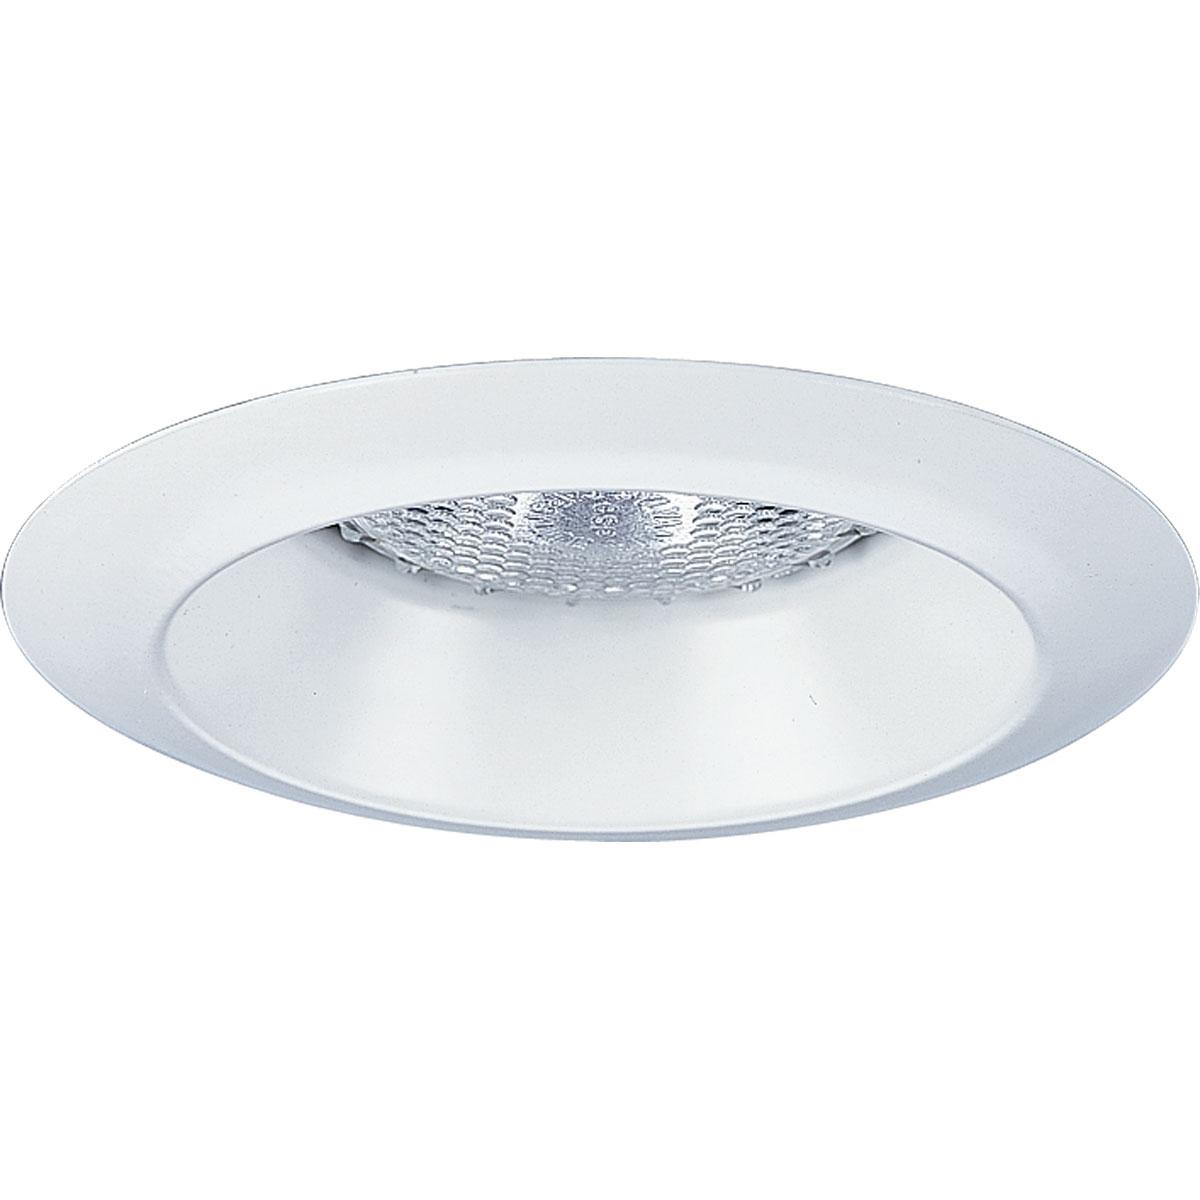 Hubbell P8041-28 4" Lensless Shower Open Trim in a White finish with matching flange finish. Damp location listed.  ; White finish. ; Flange is brushed in matching finish. ; No light leaks around trim flange. ; One 55w PAR-16 or 50w PAR-20/R-20.